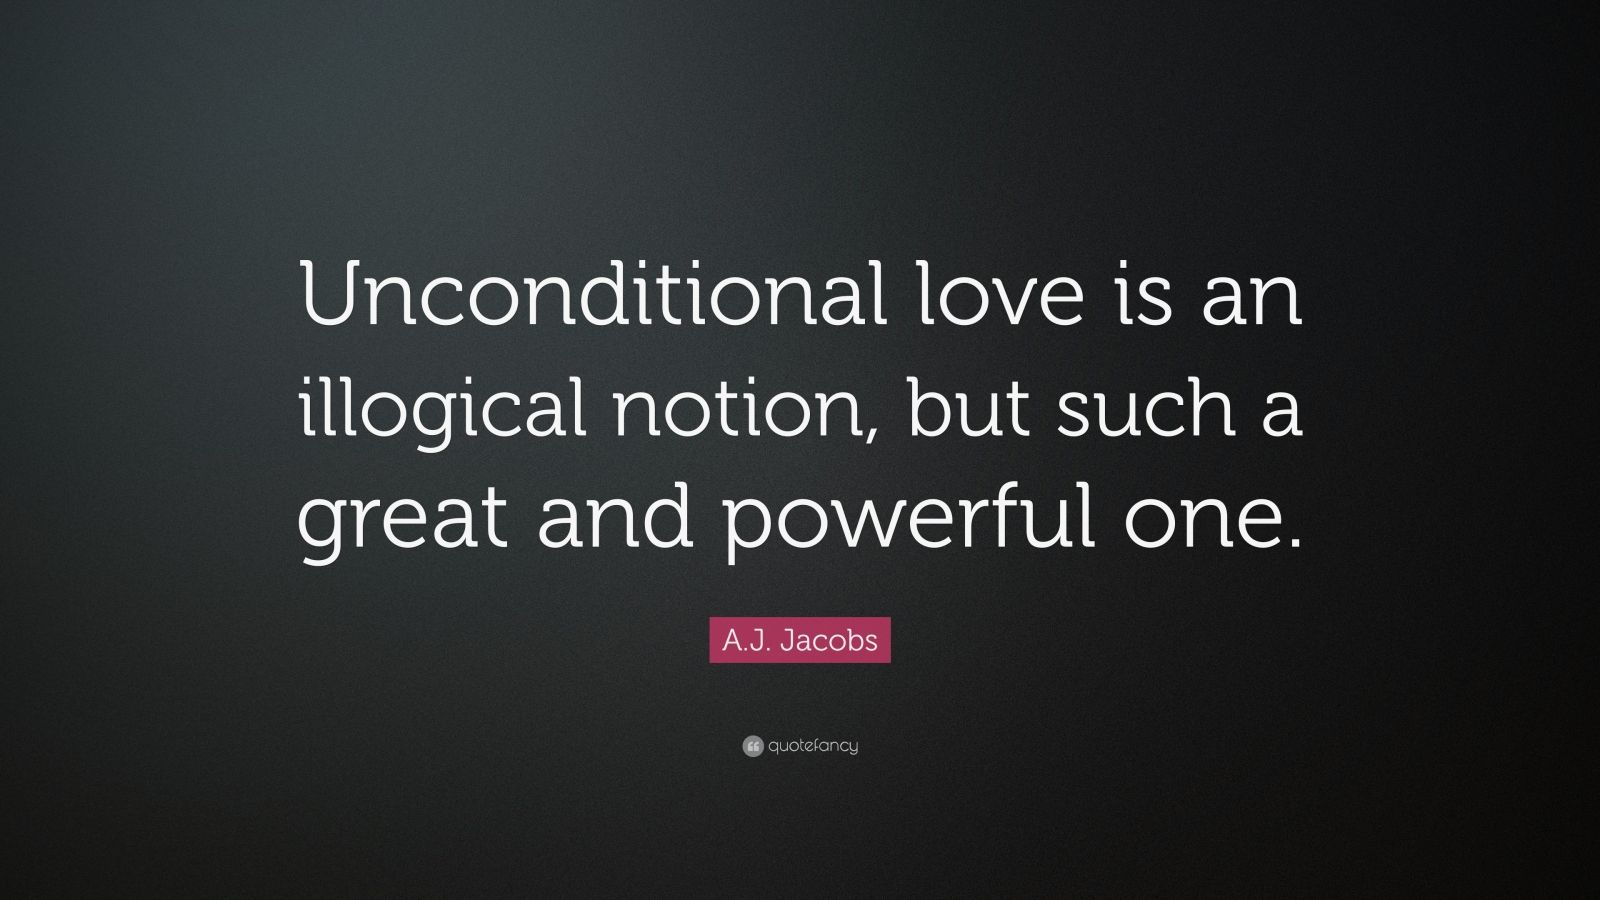 A.J. Jacobs Quote: “Unconditional love is an illogical notion, but such